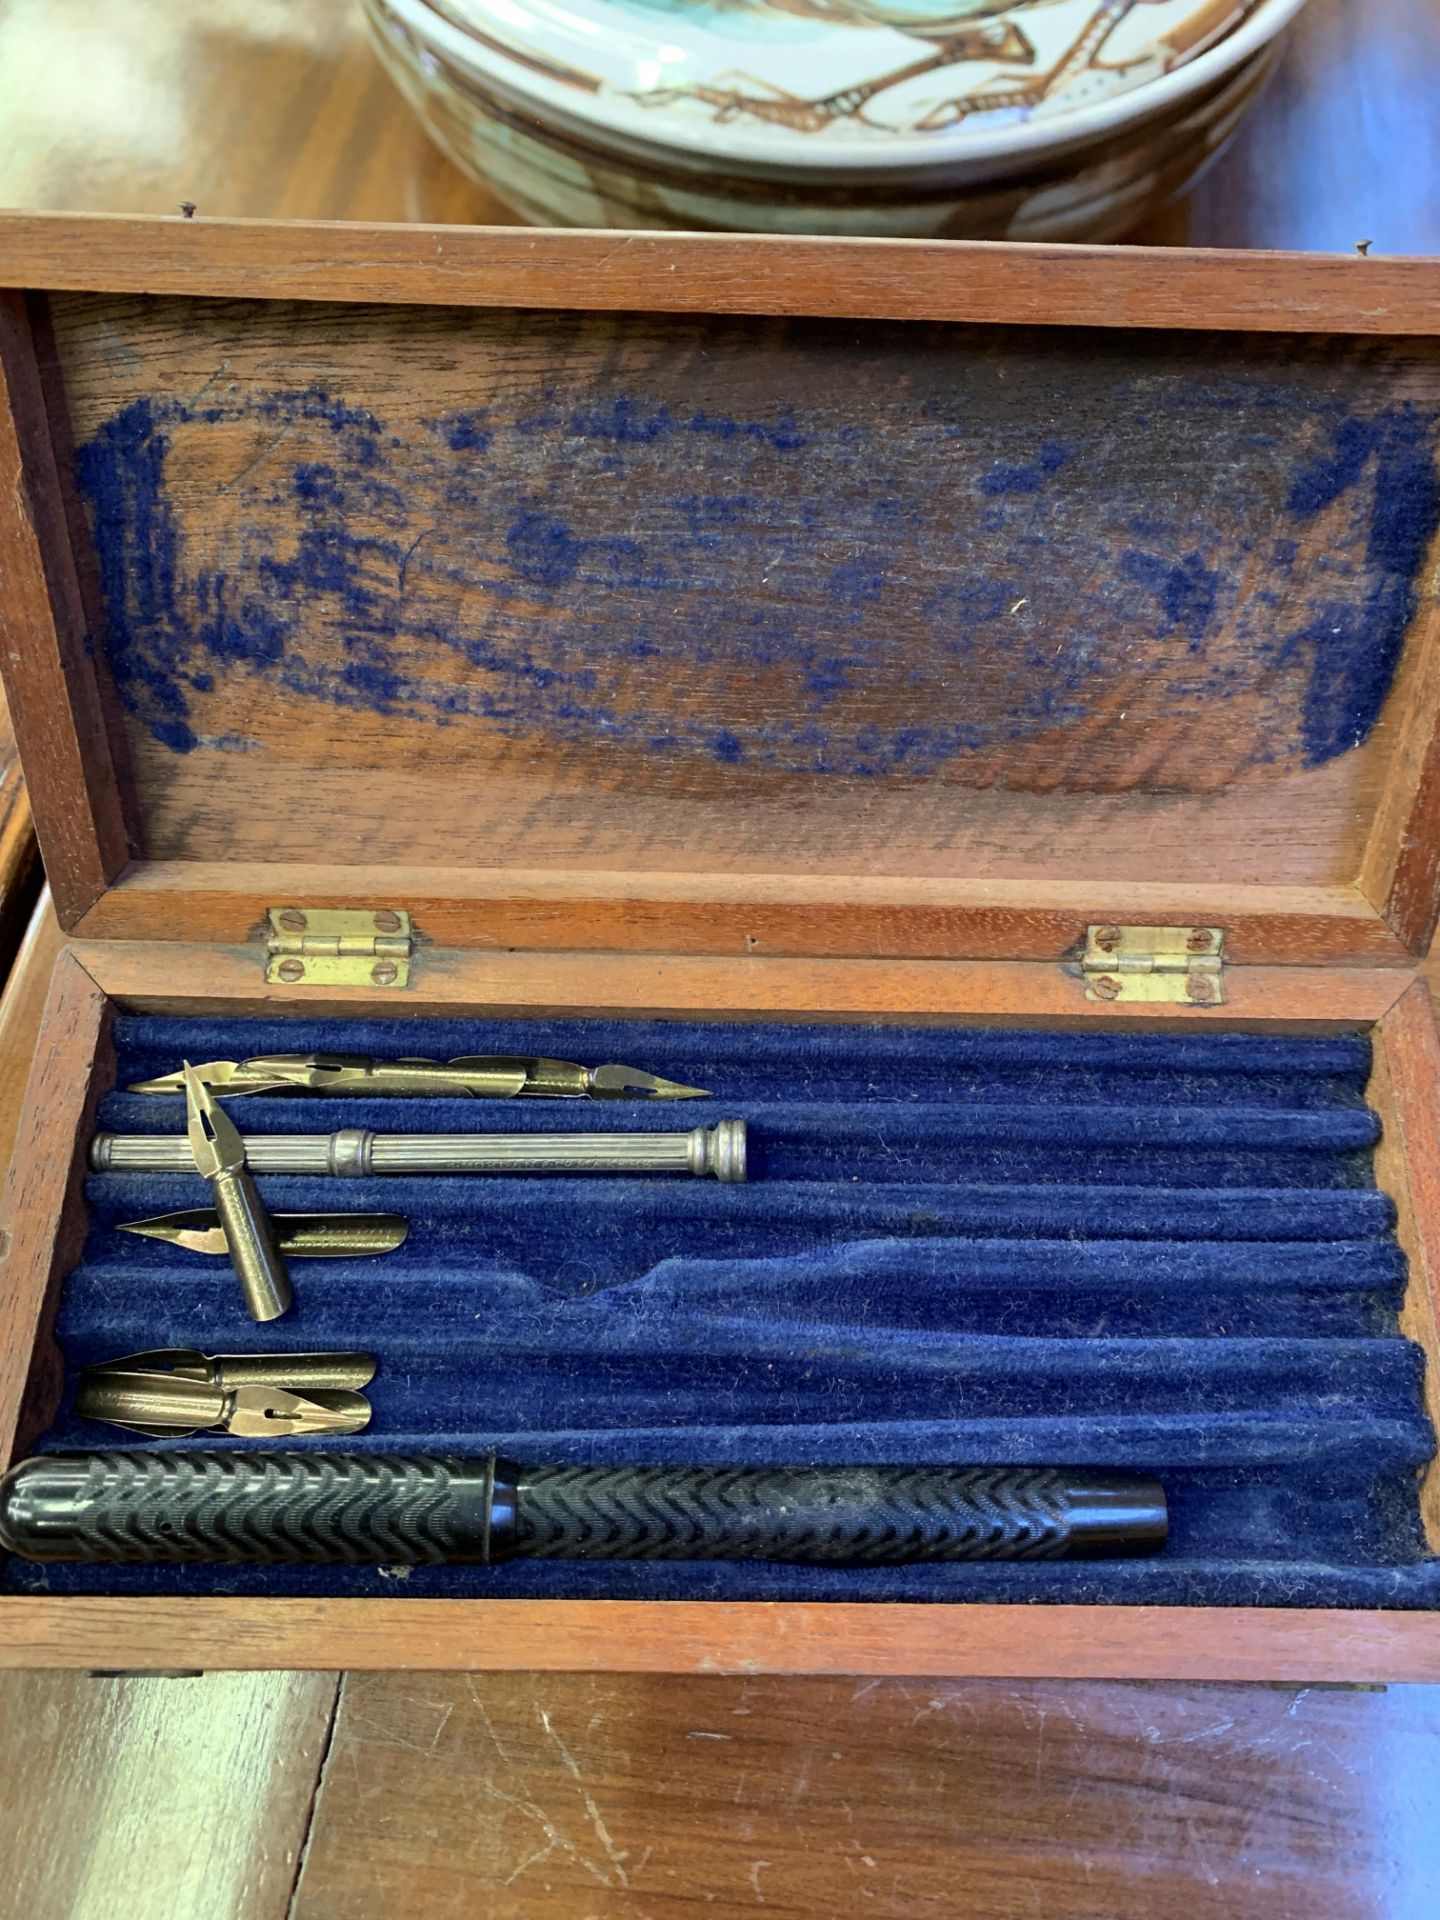 Mahogany box containing drawing instruments, and a S & Ds Champion pen - Image 2 of 4